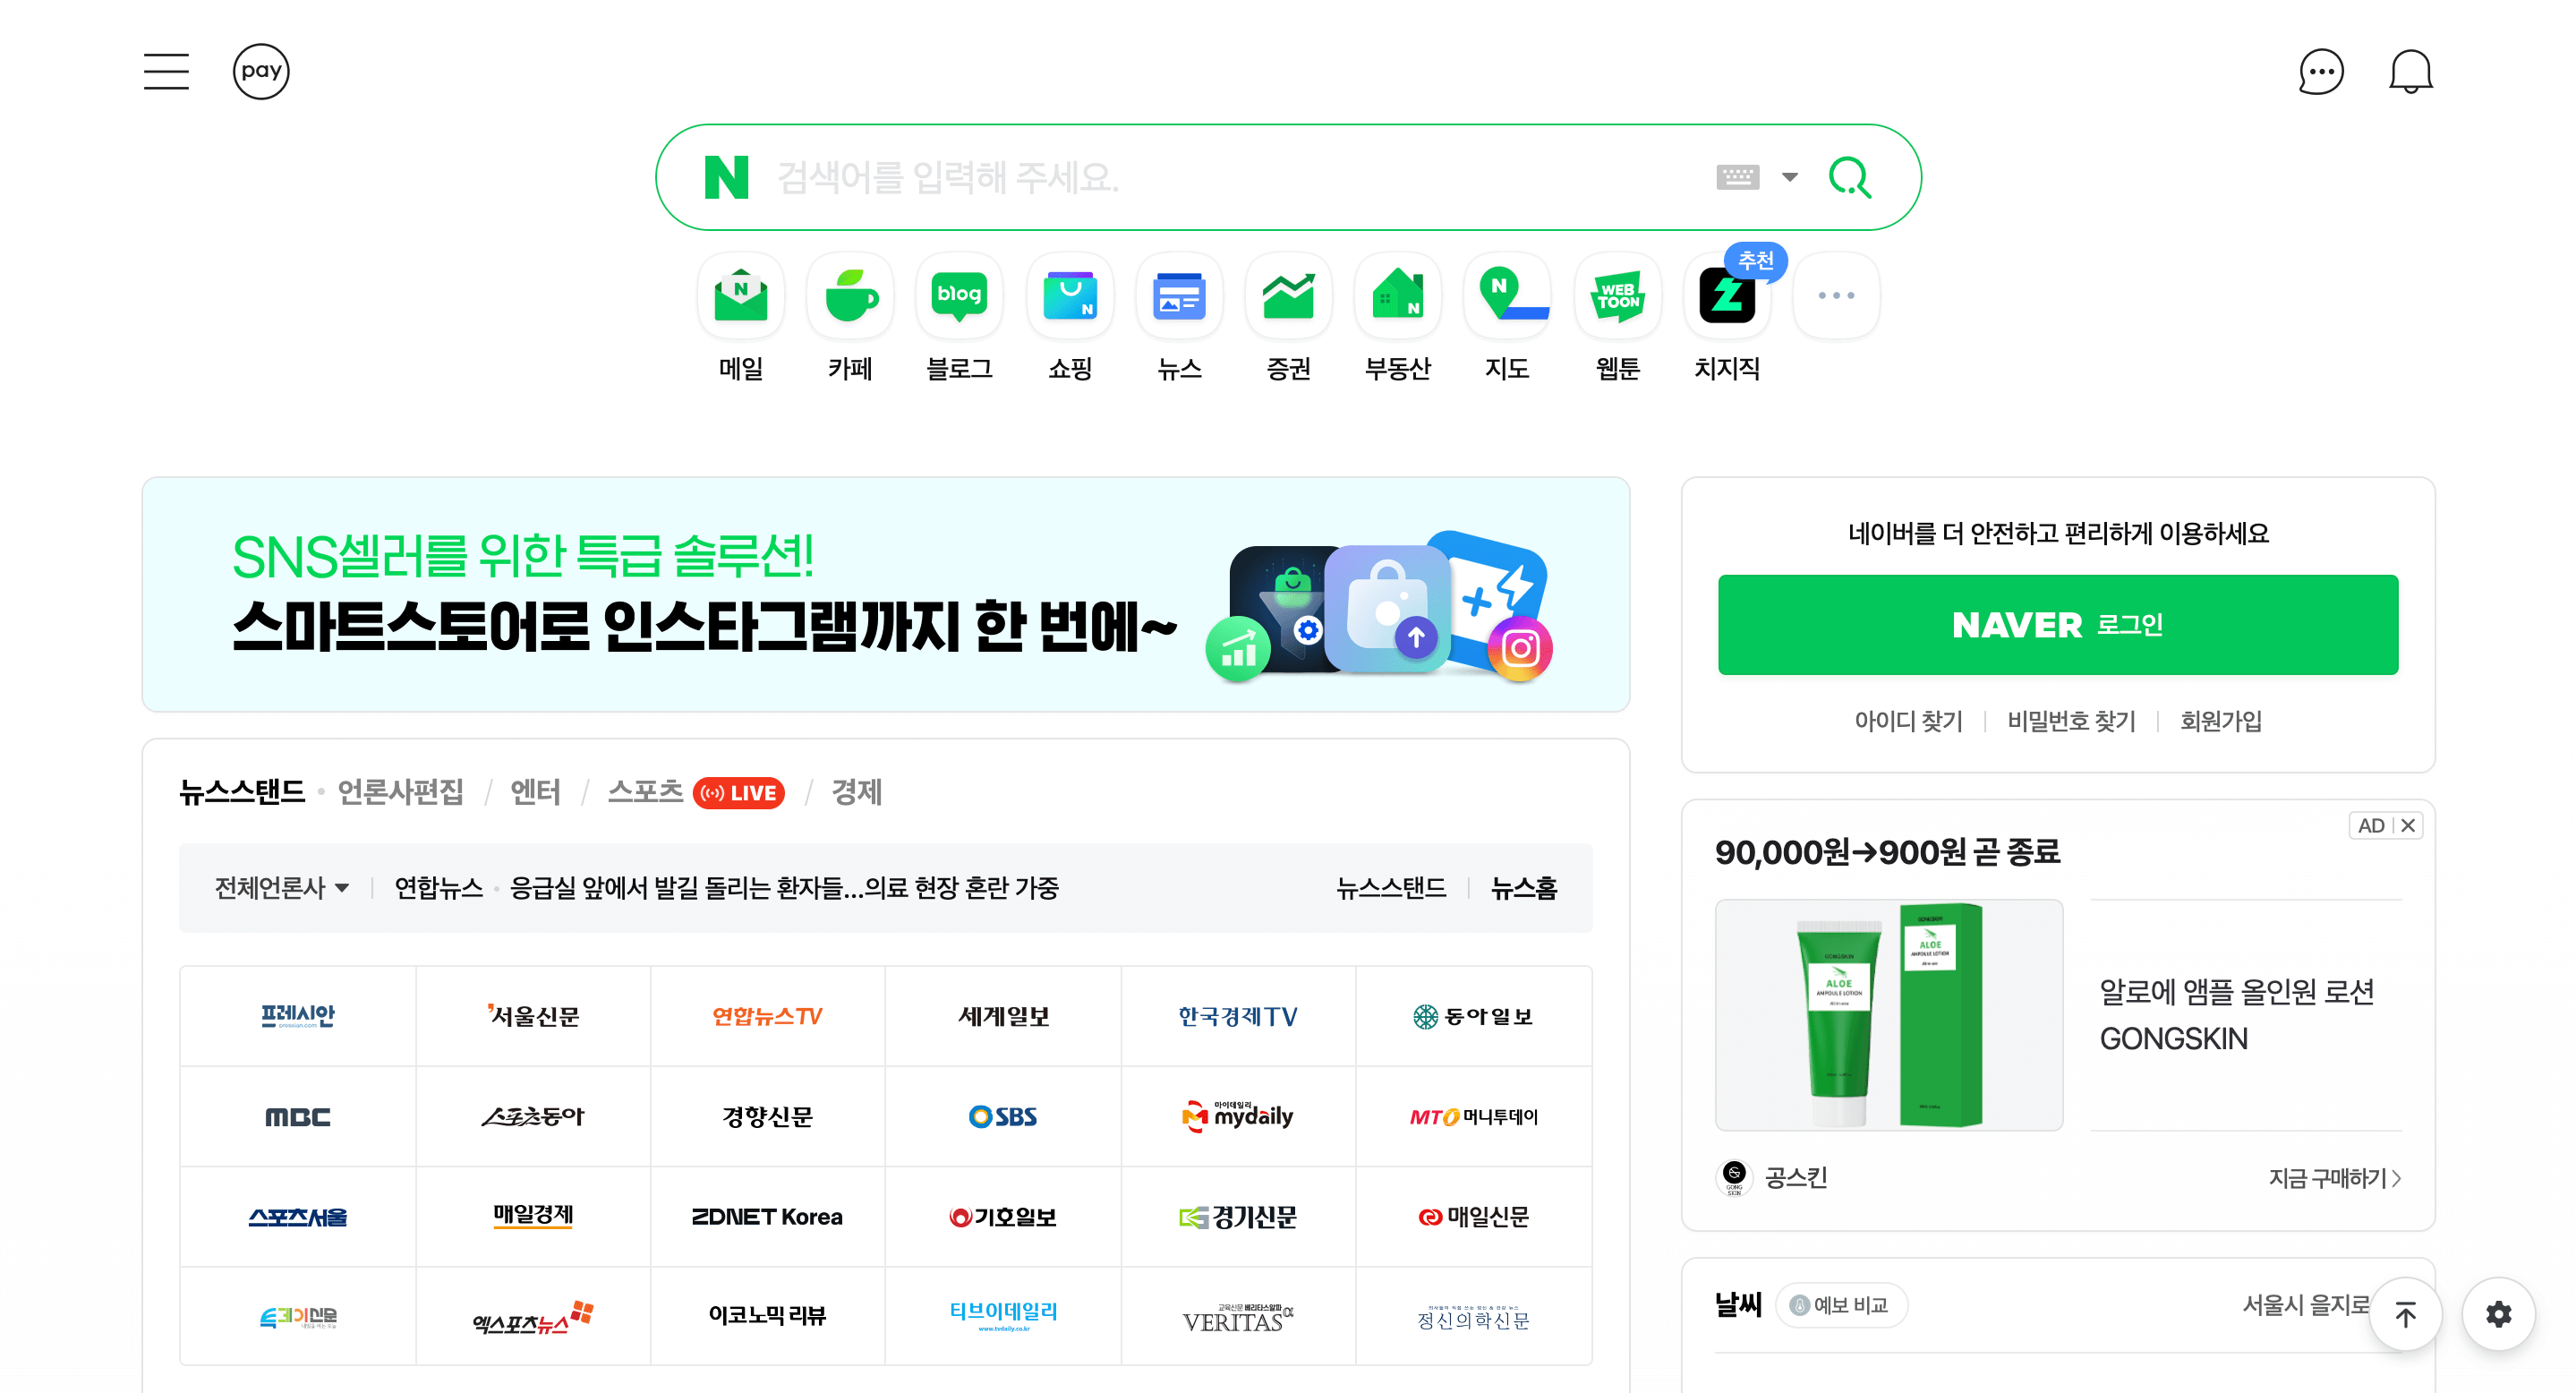 Search Engine Naver